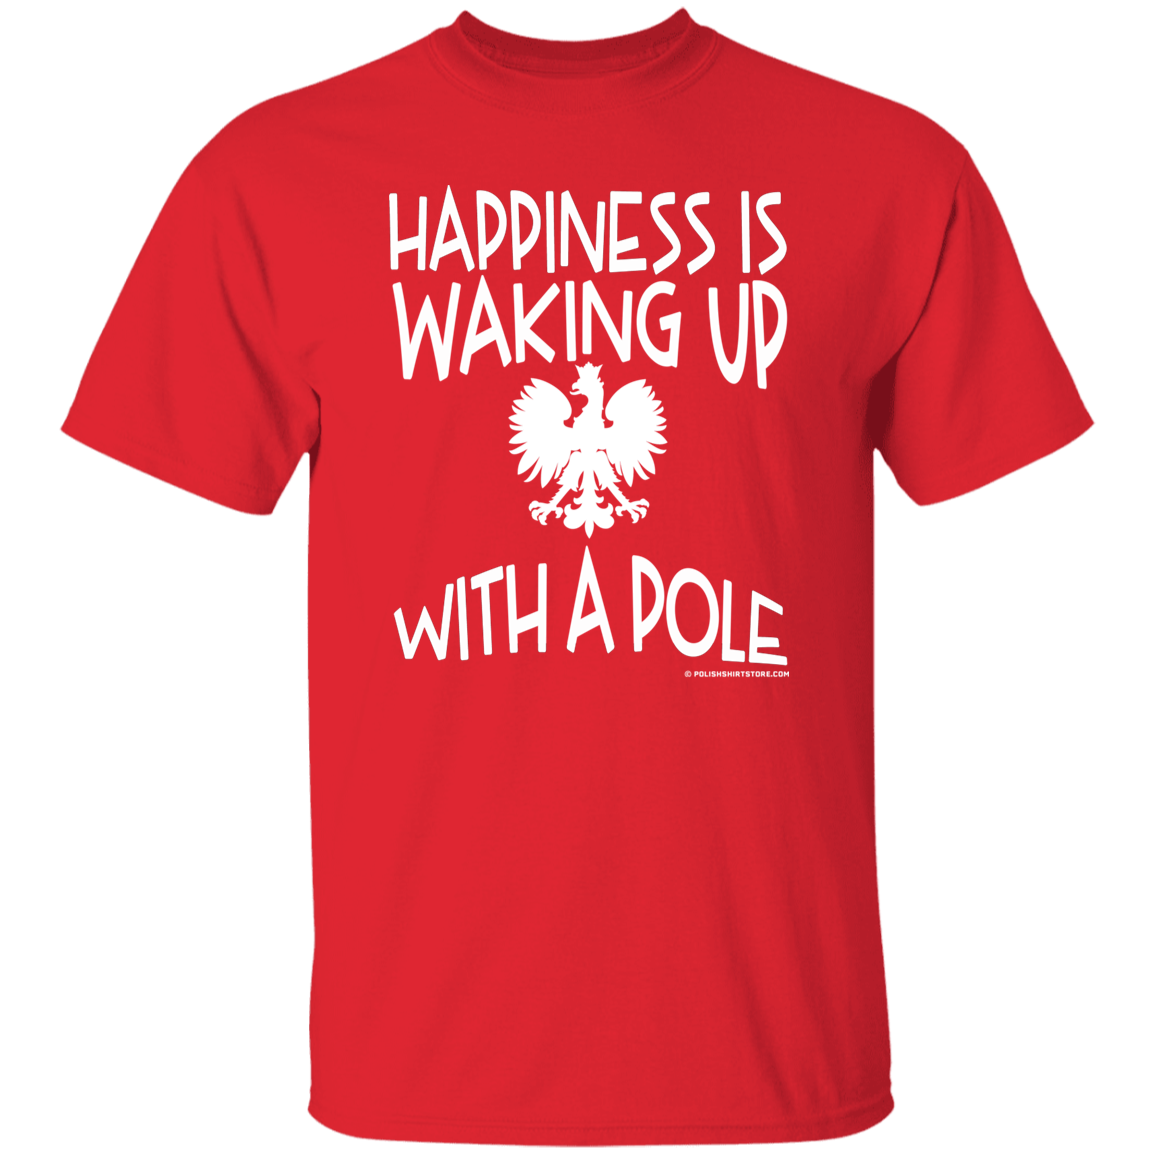 Happiness Is Waking Up With A Pole Apparel CustomCat G500 5.3 oz. T-Shirt Red S